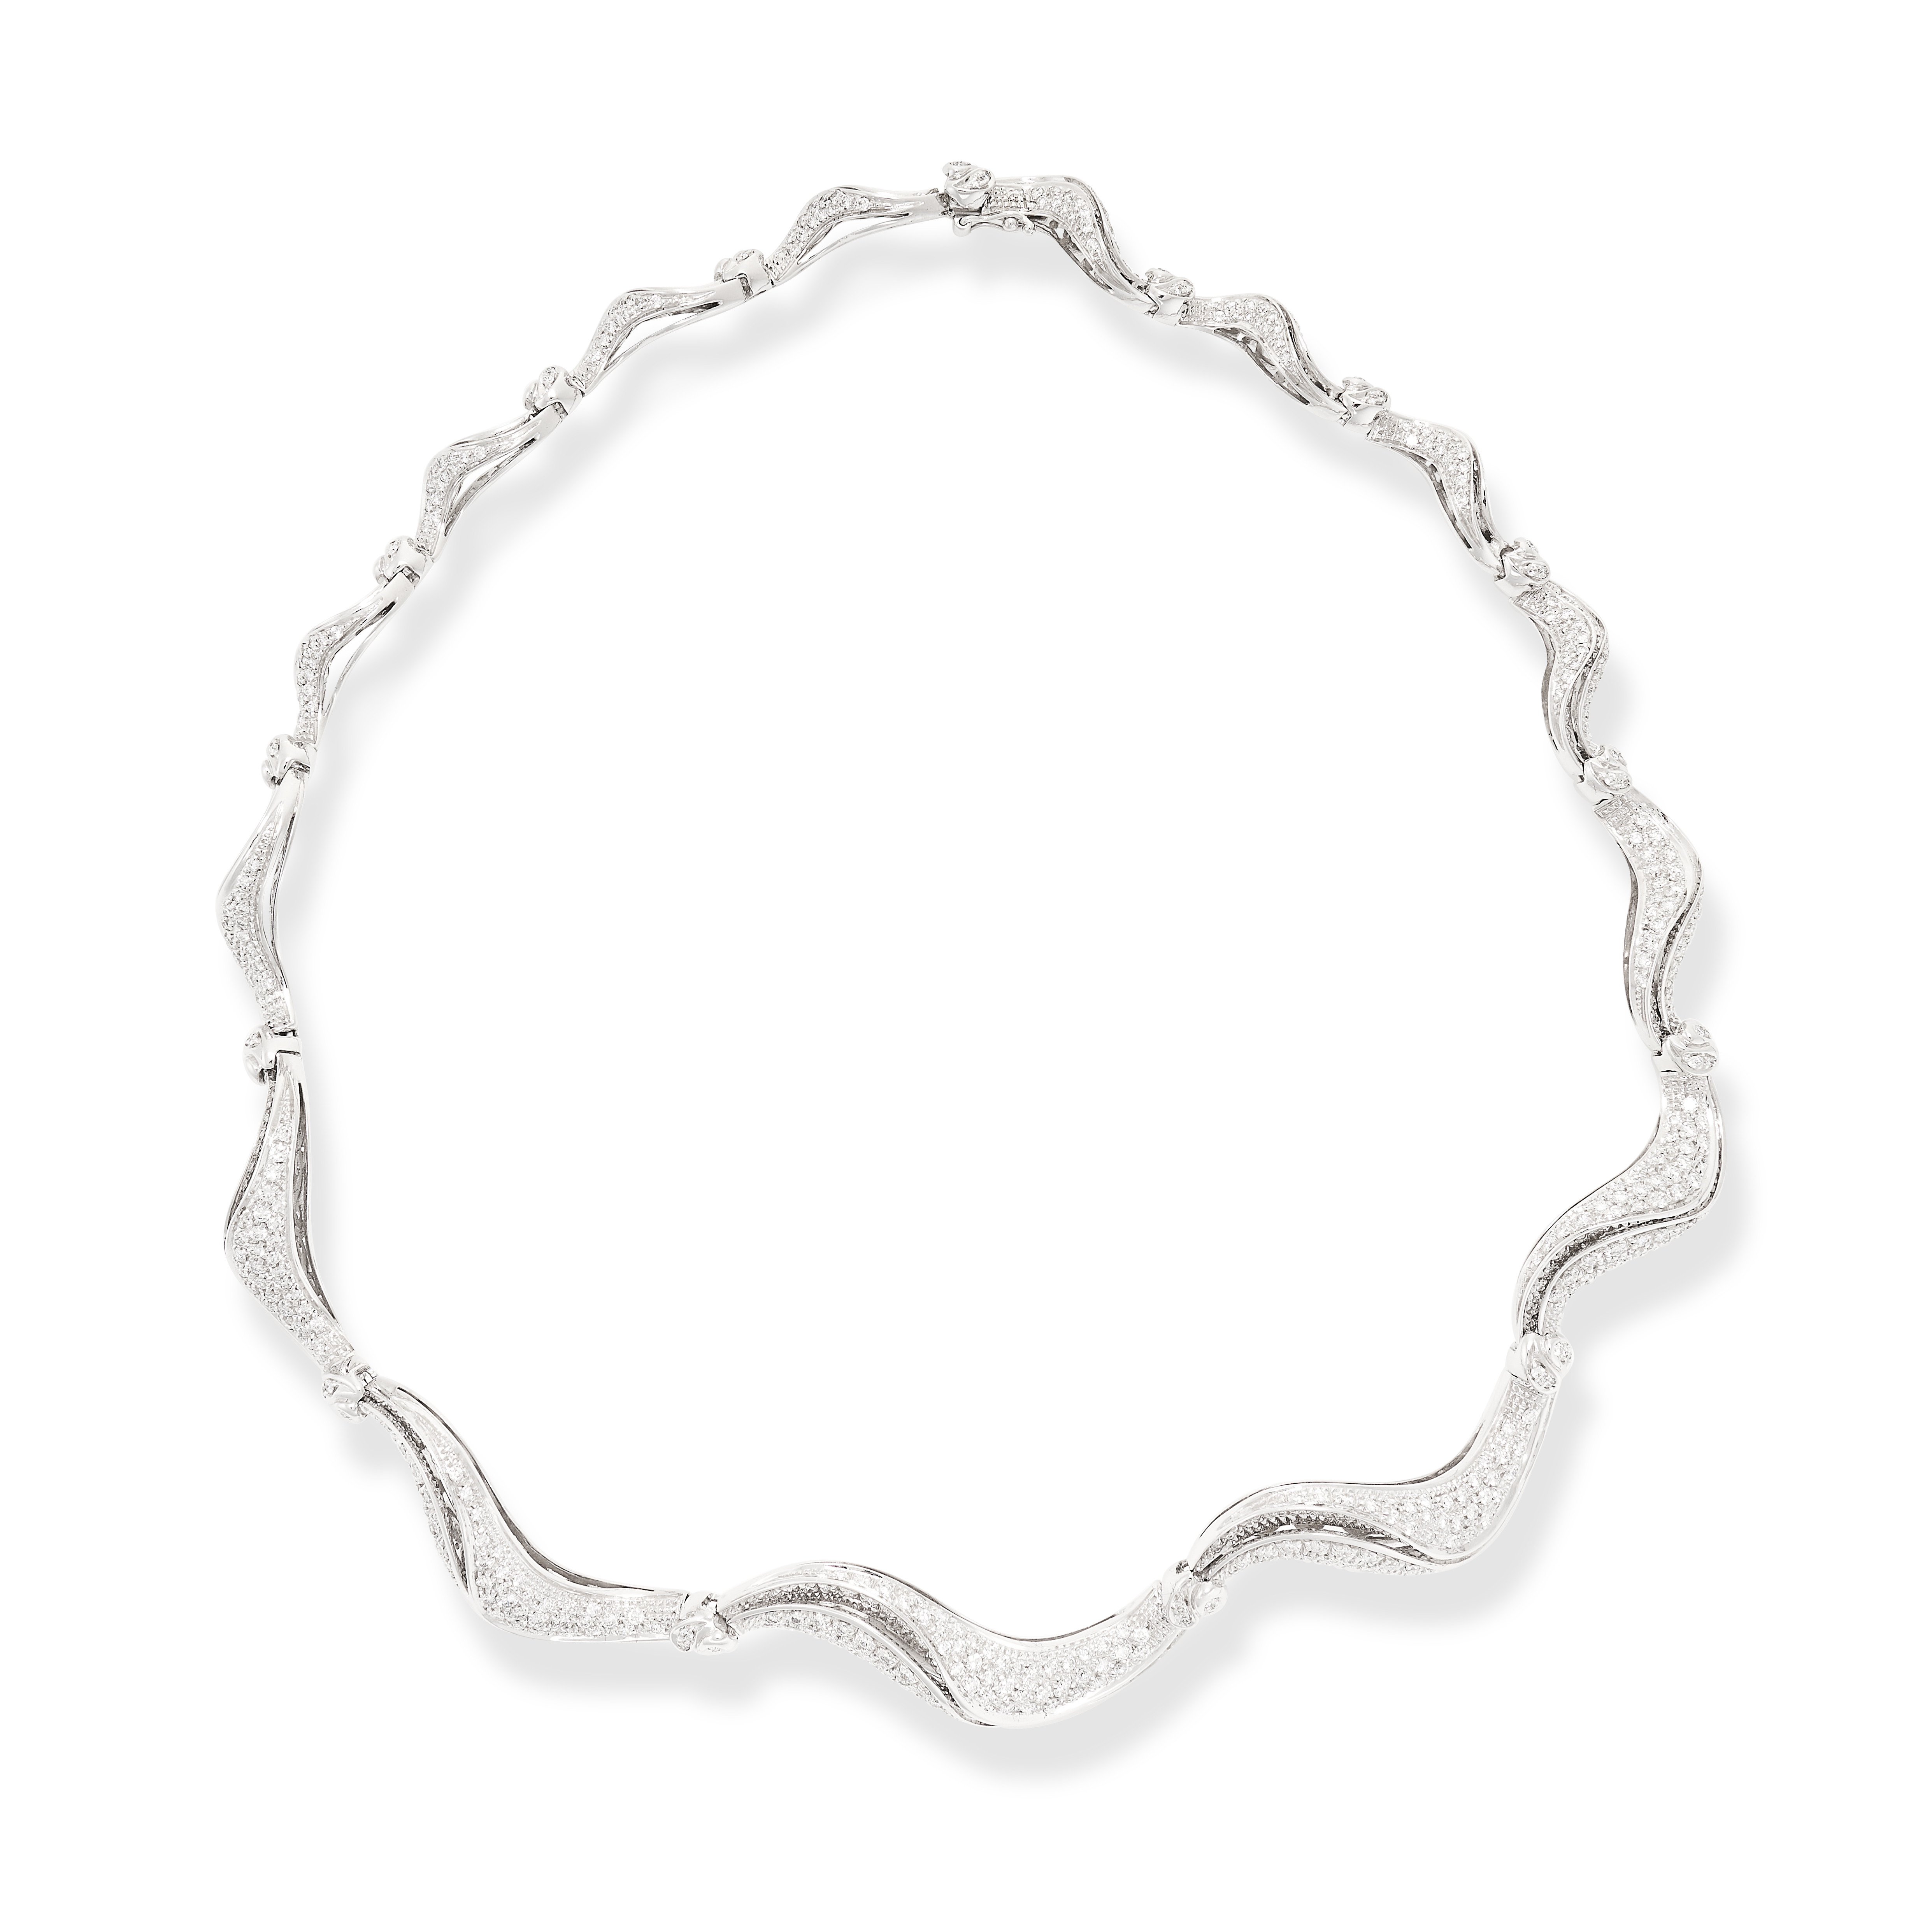 DAMIANI, A DIAMOND NECKLACE in 18ct white gold, comprising a series of graduated scrolling links,